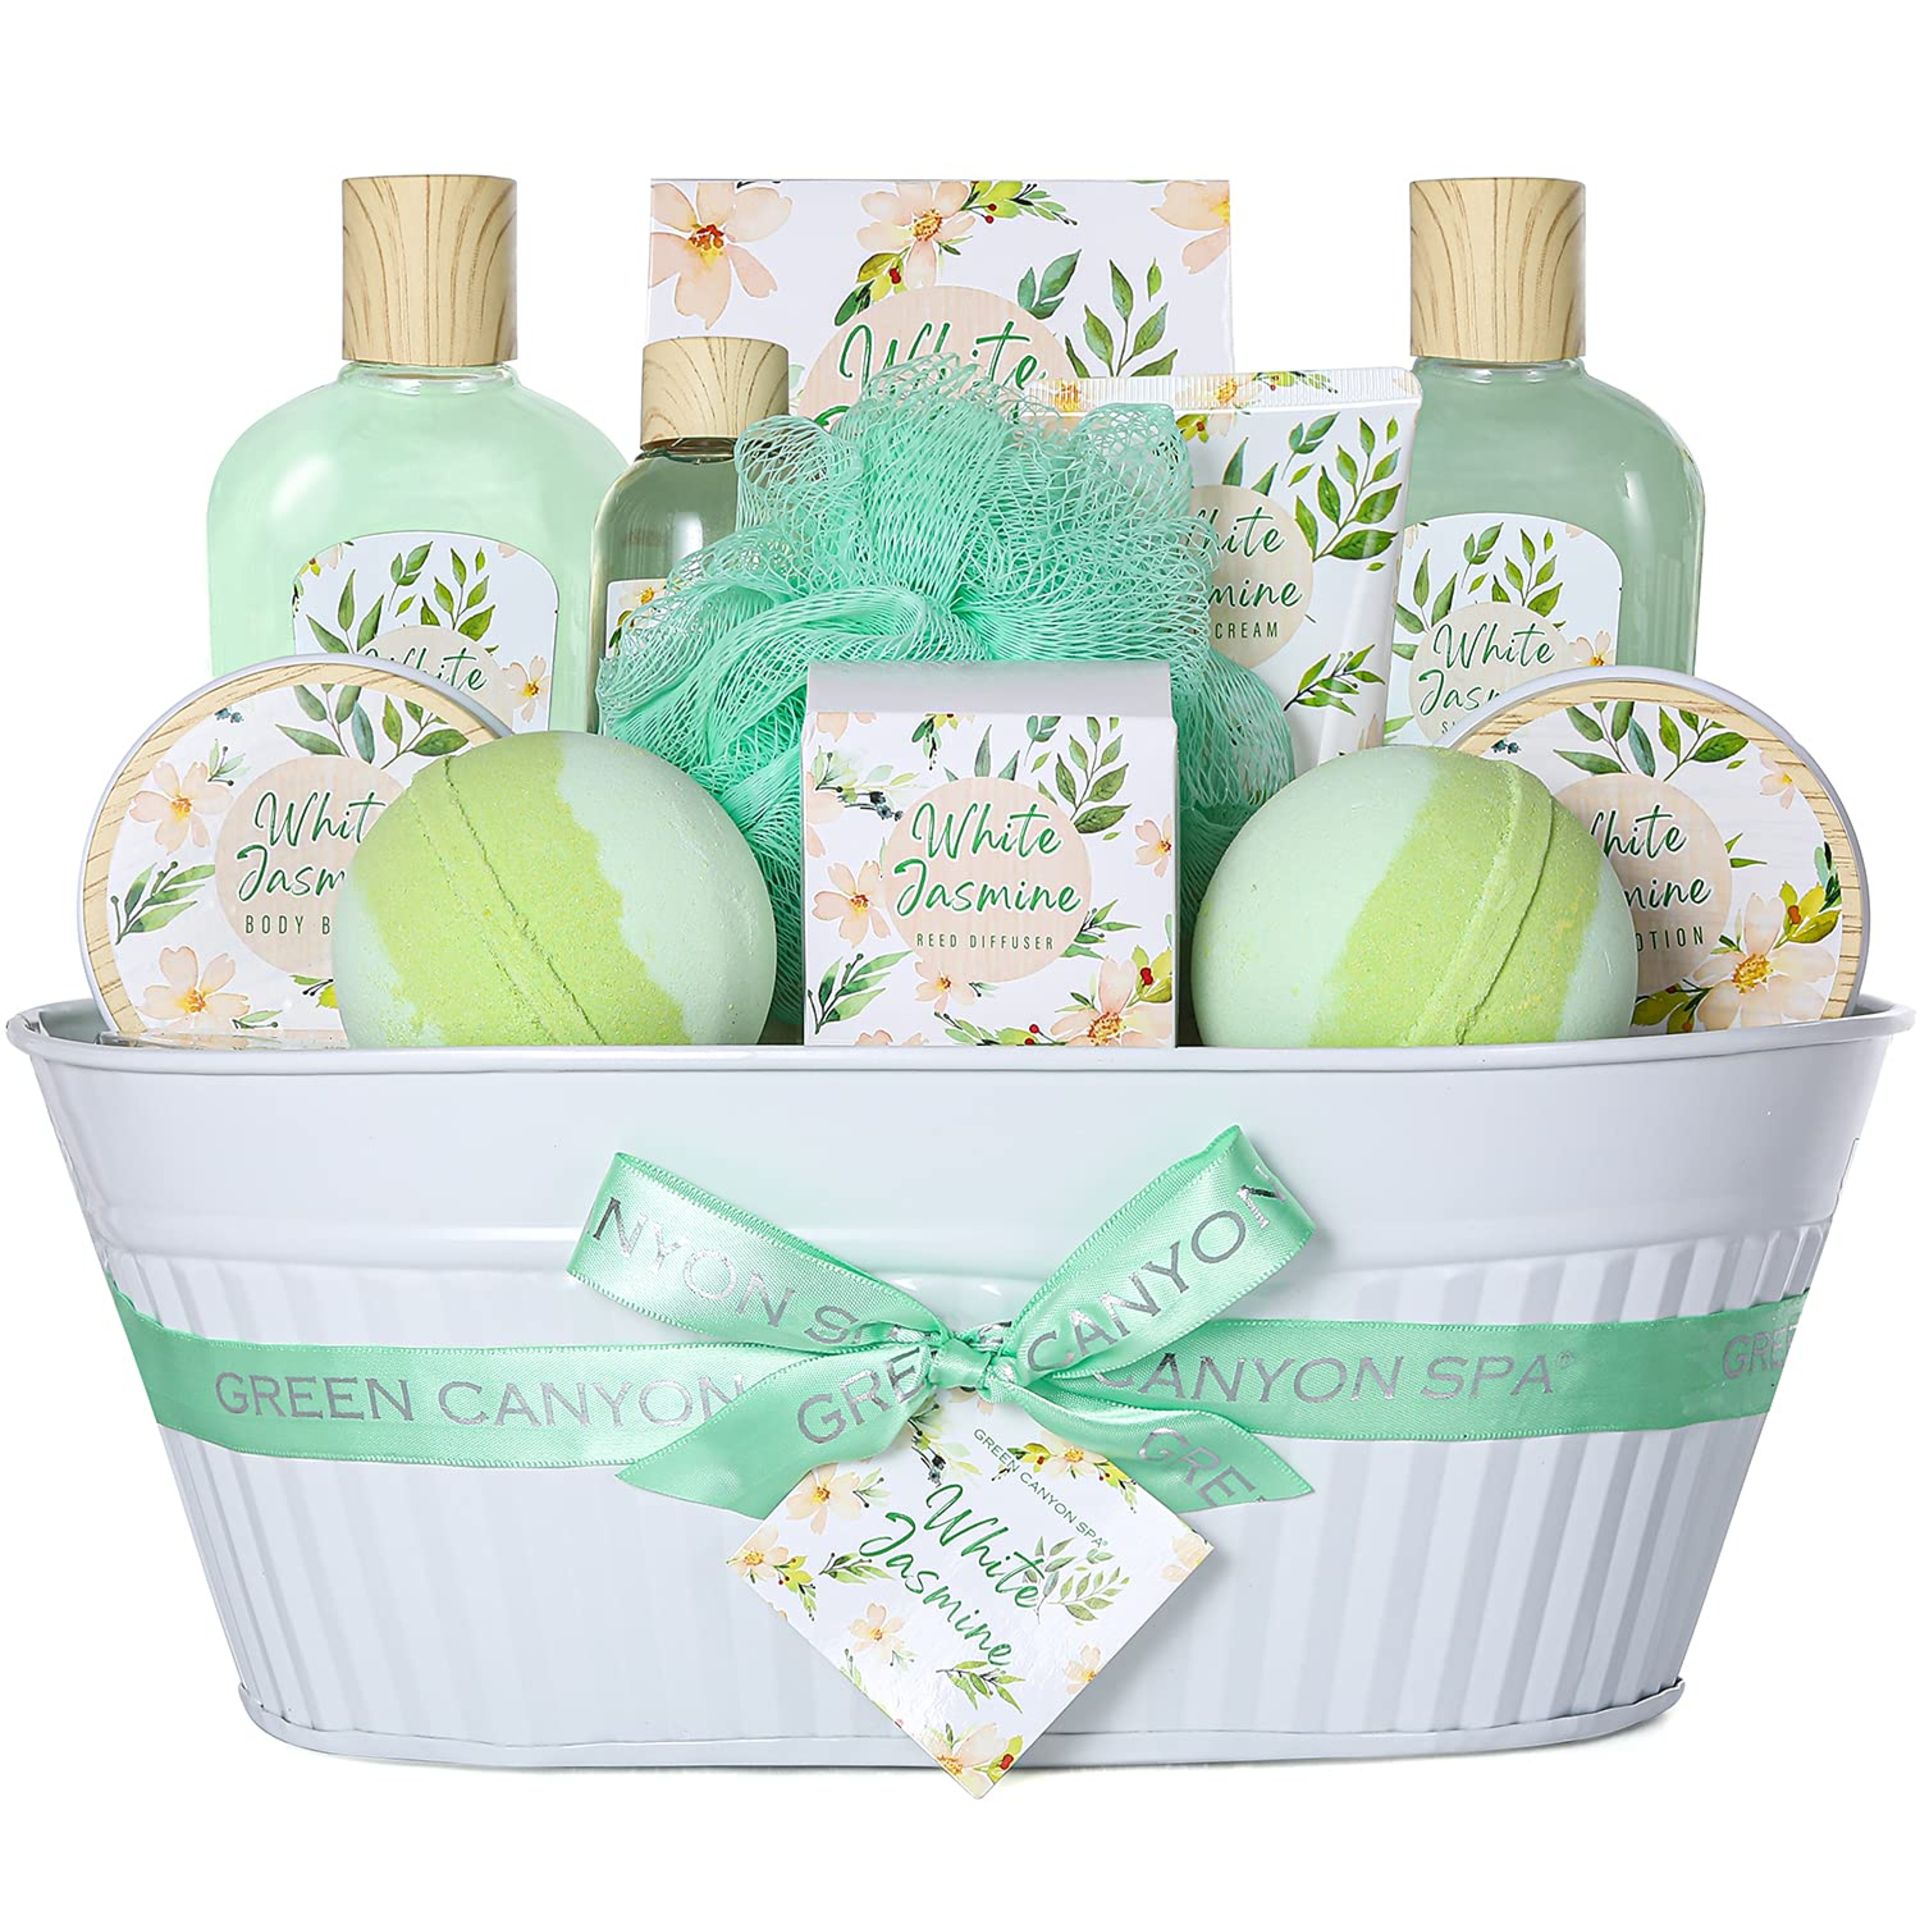 12 X NEW PACKAGED - Green Canyon 12 Pcs White Jasmine Bath Gift Sets Home Spa Gift Baskets Green